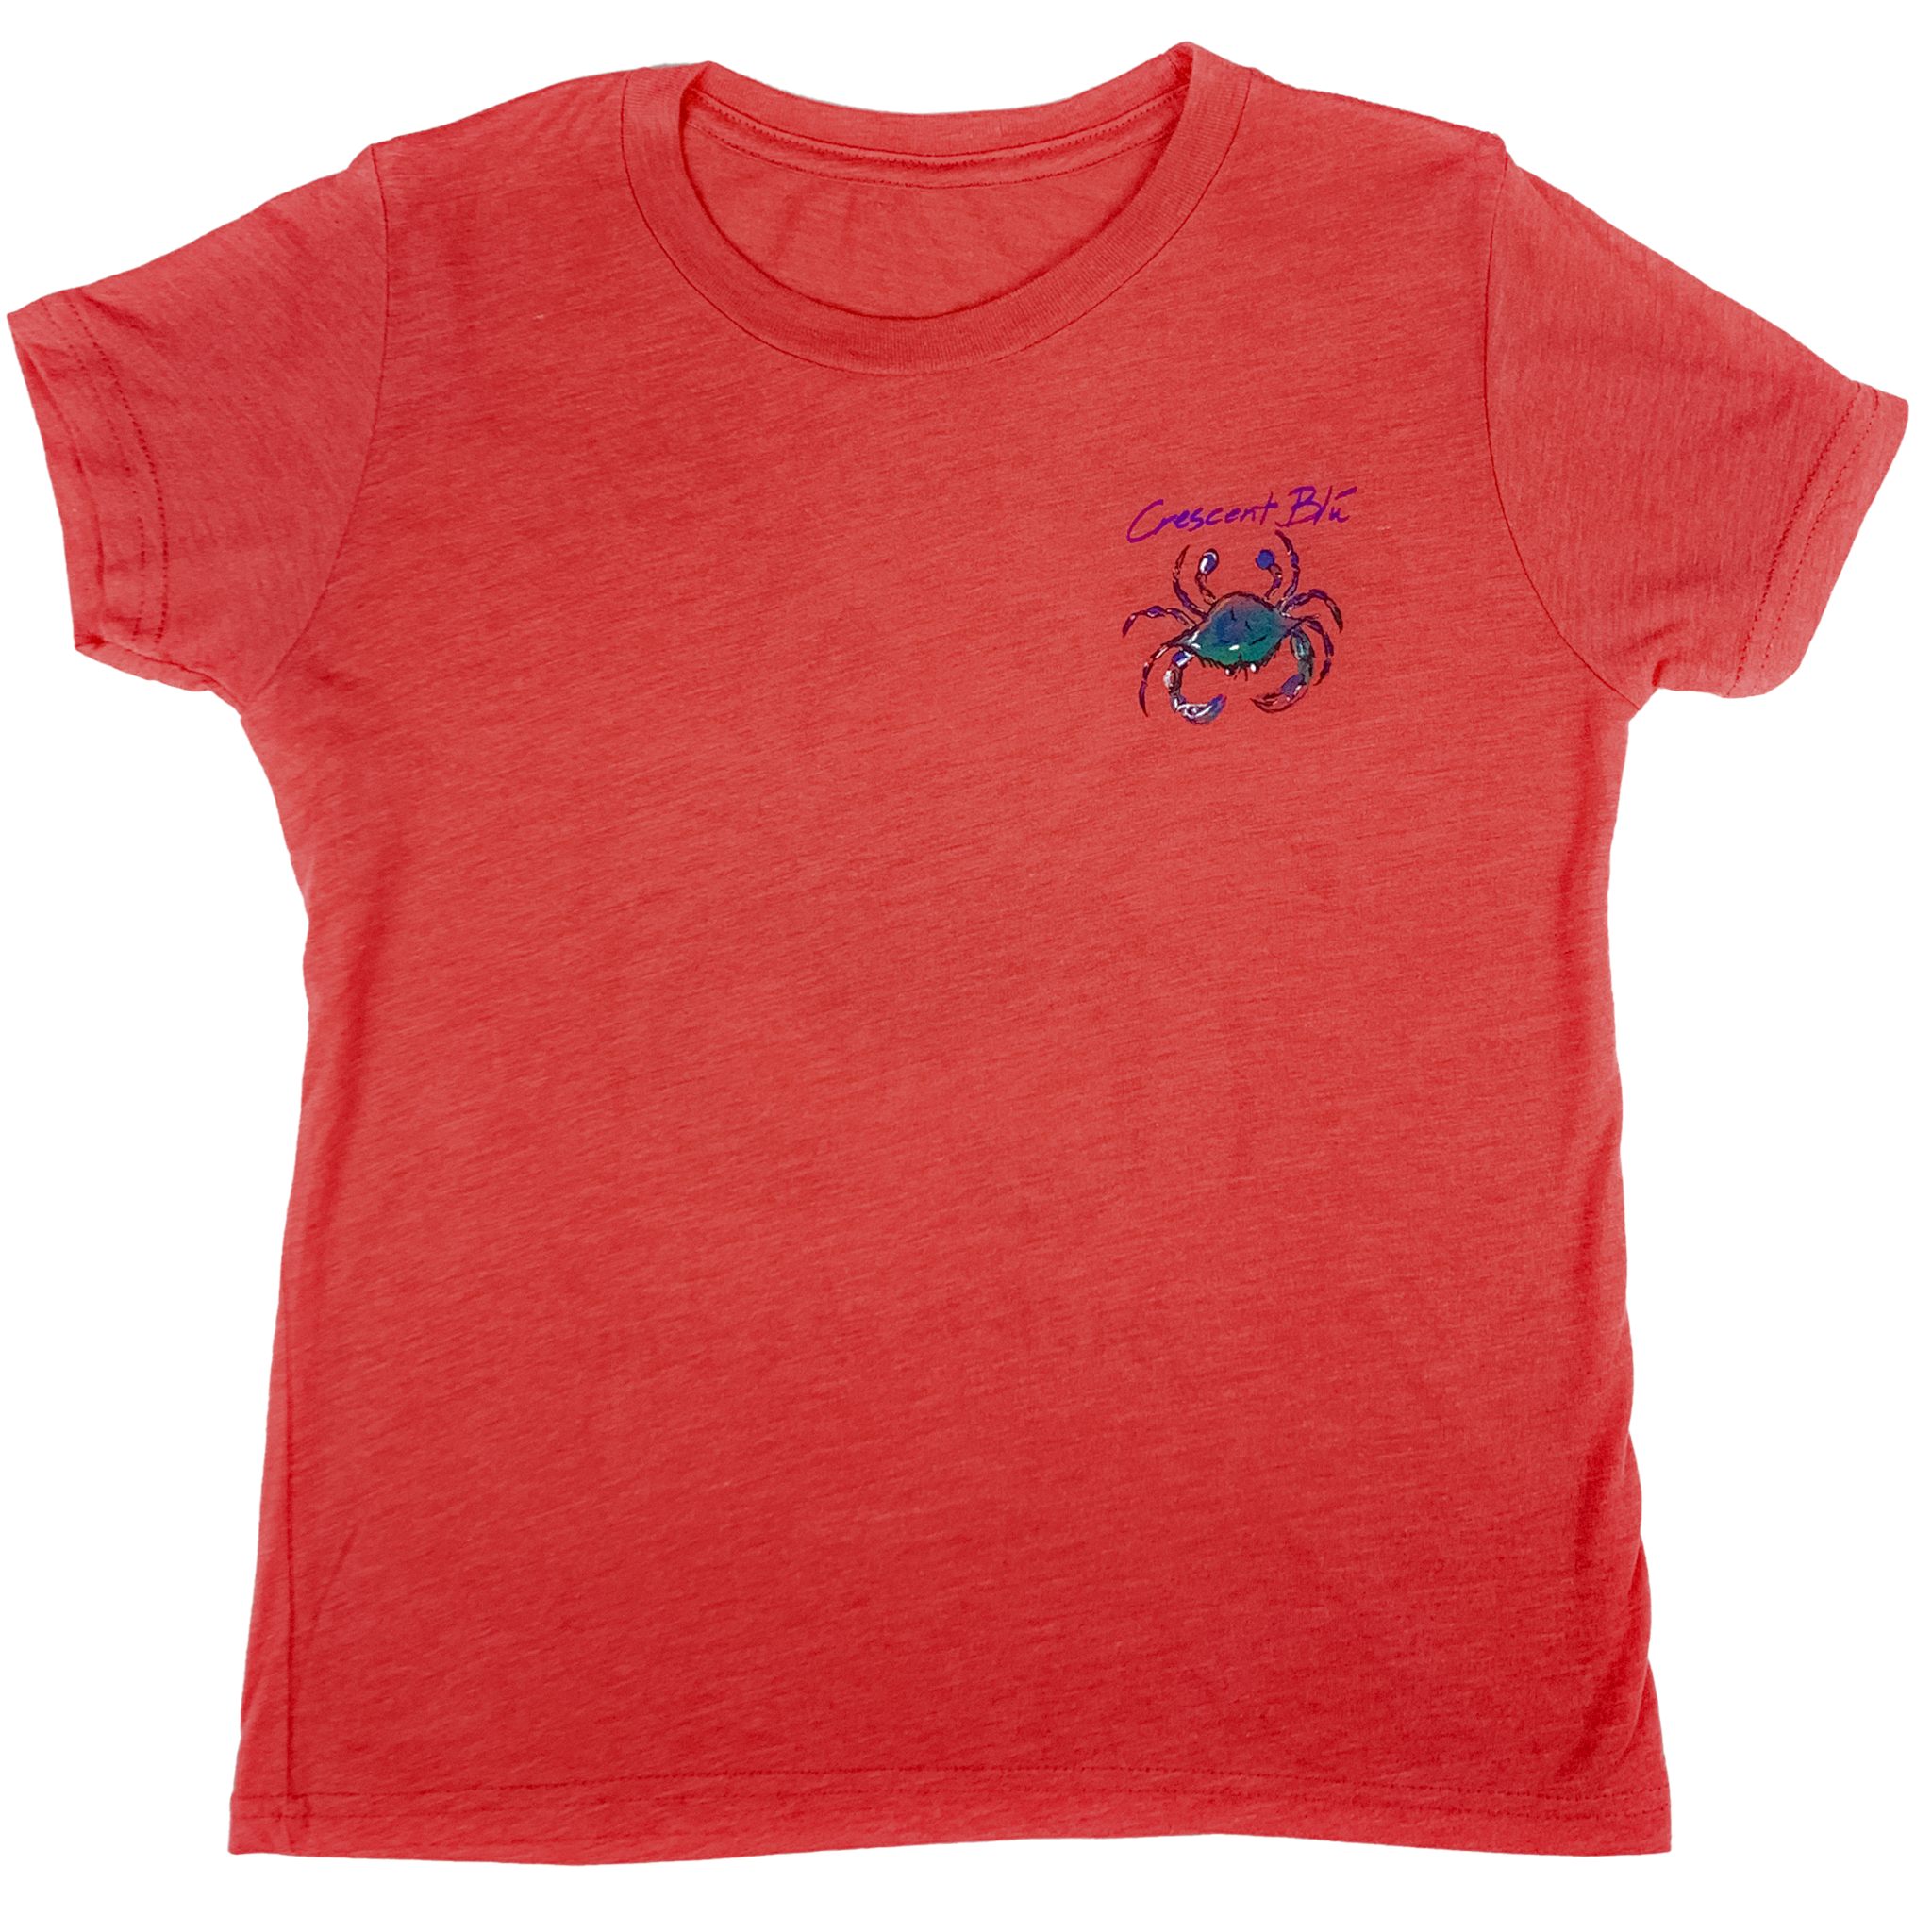 red tribeland top with crab on upper left chest